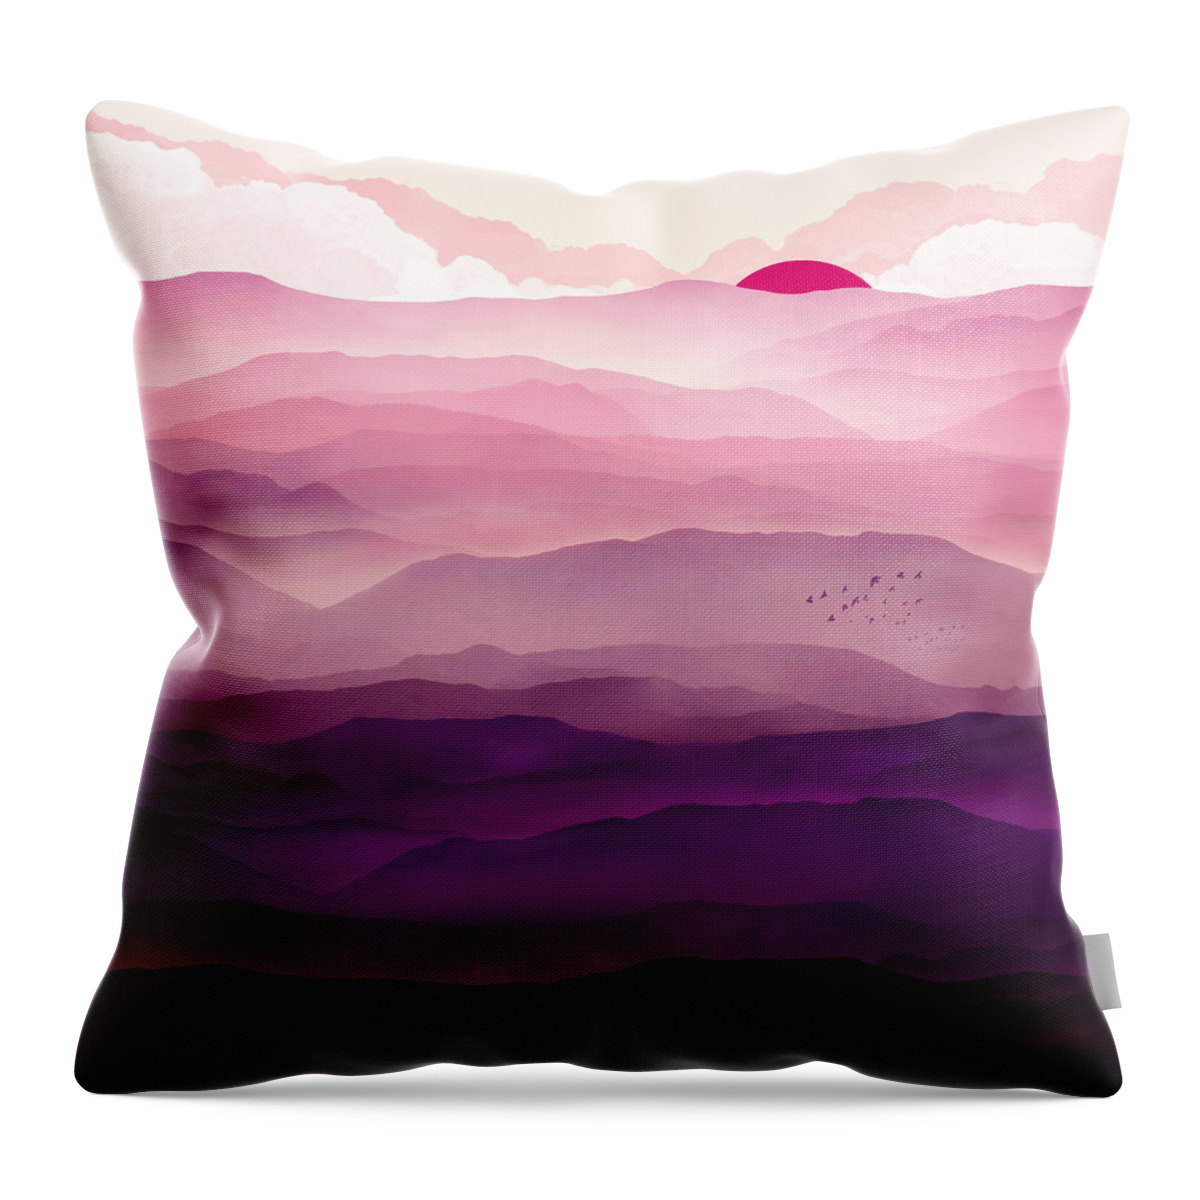 #faatoppicks Throw Pillow featuring the digital art Ultraviolet Day by Spacefrog Designs